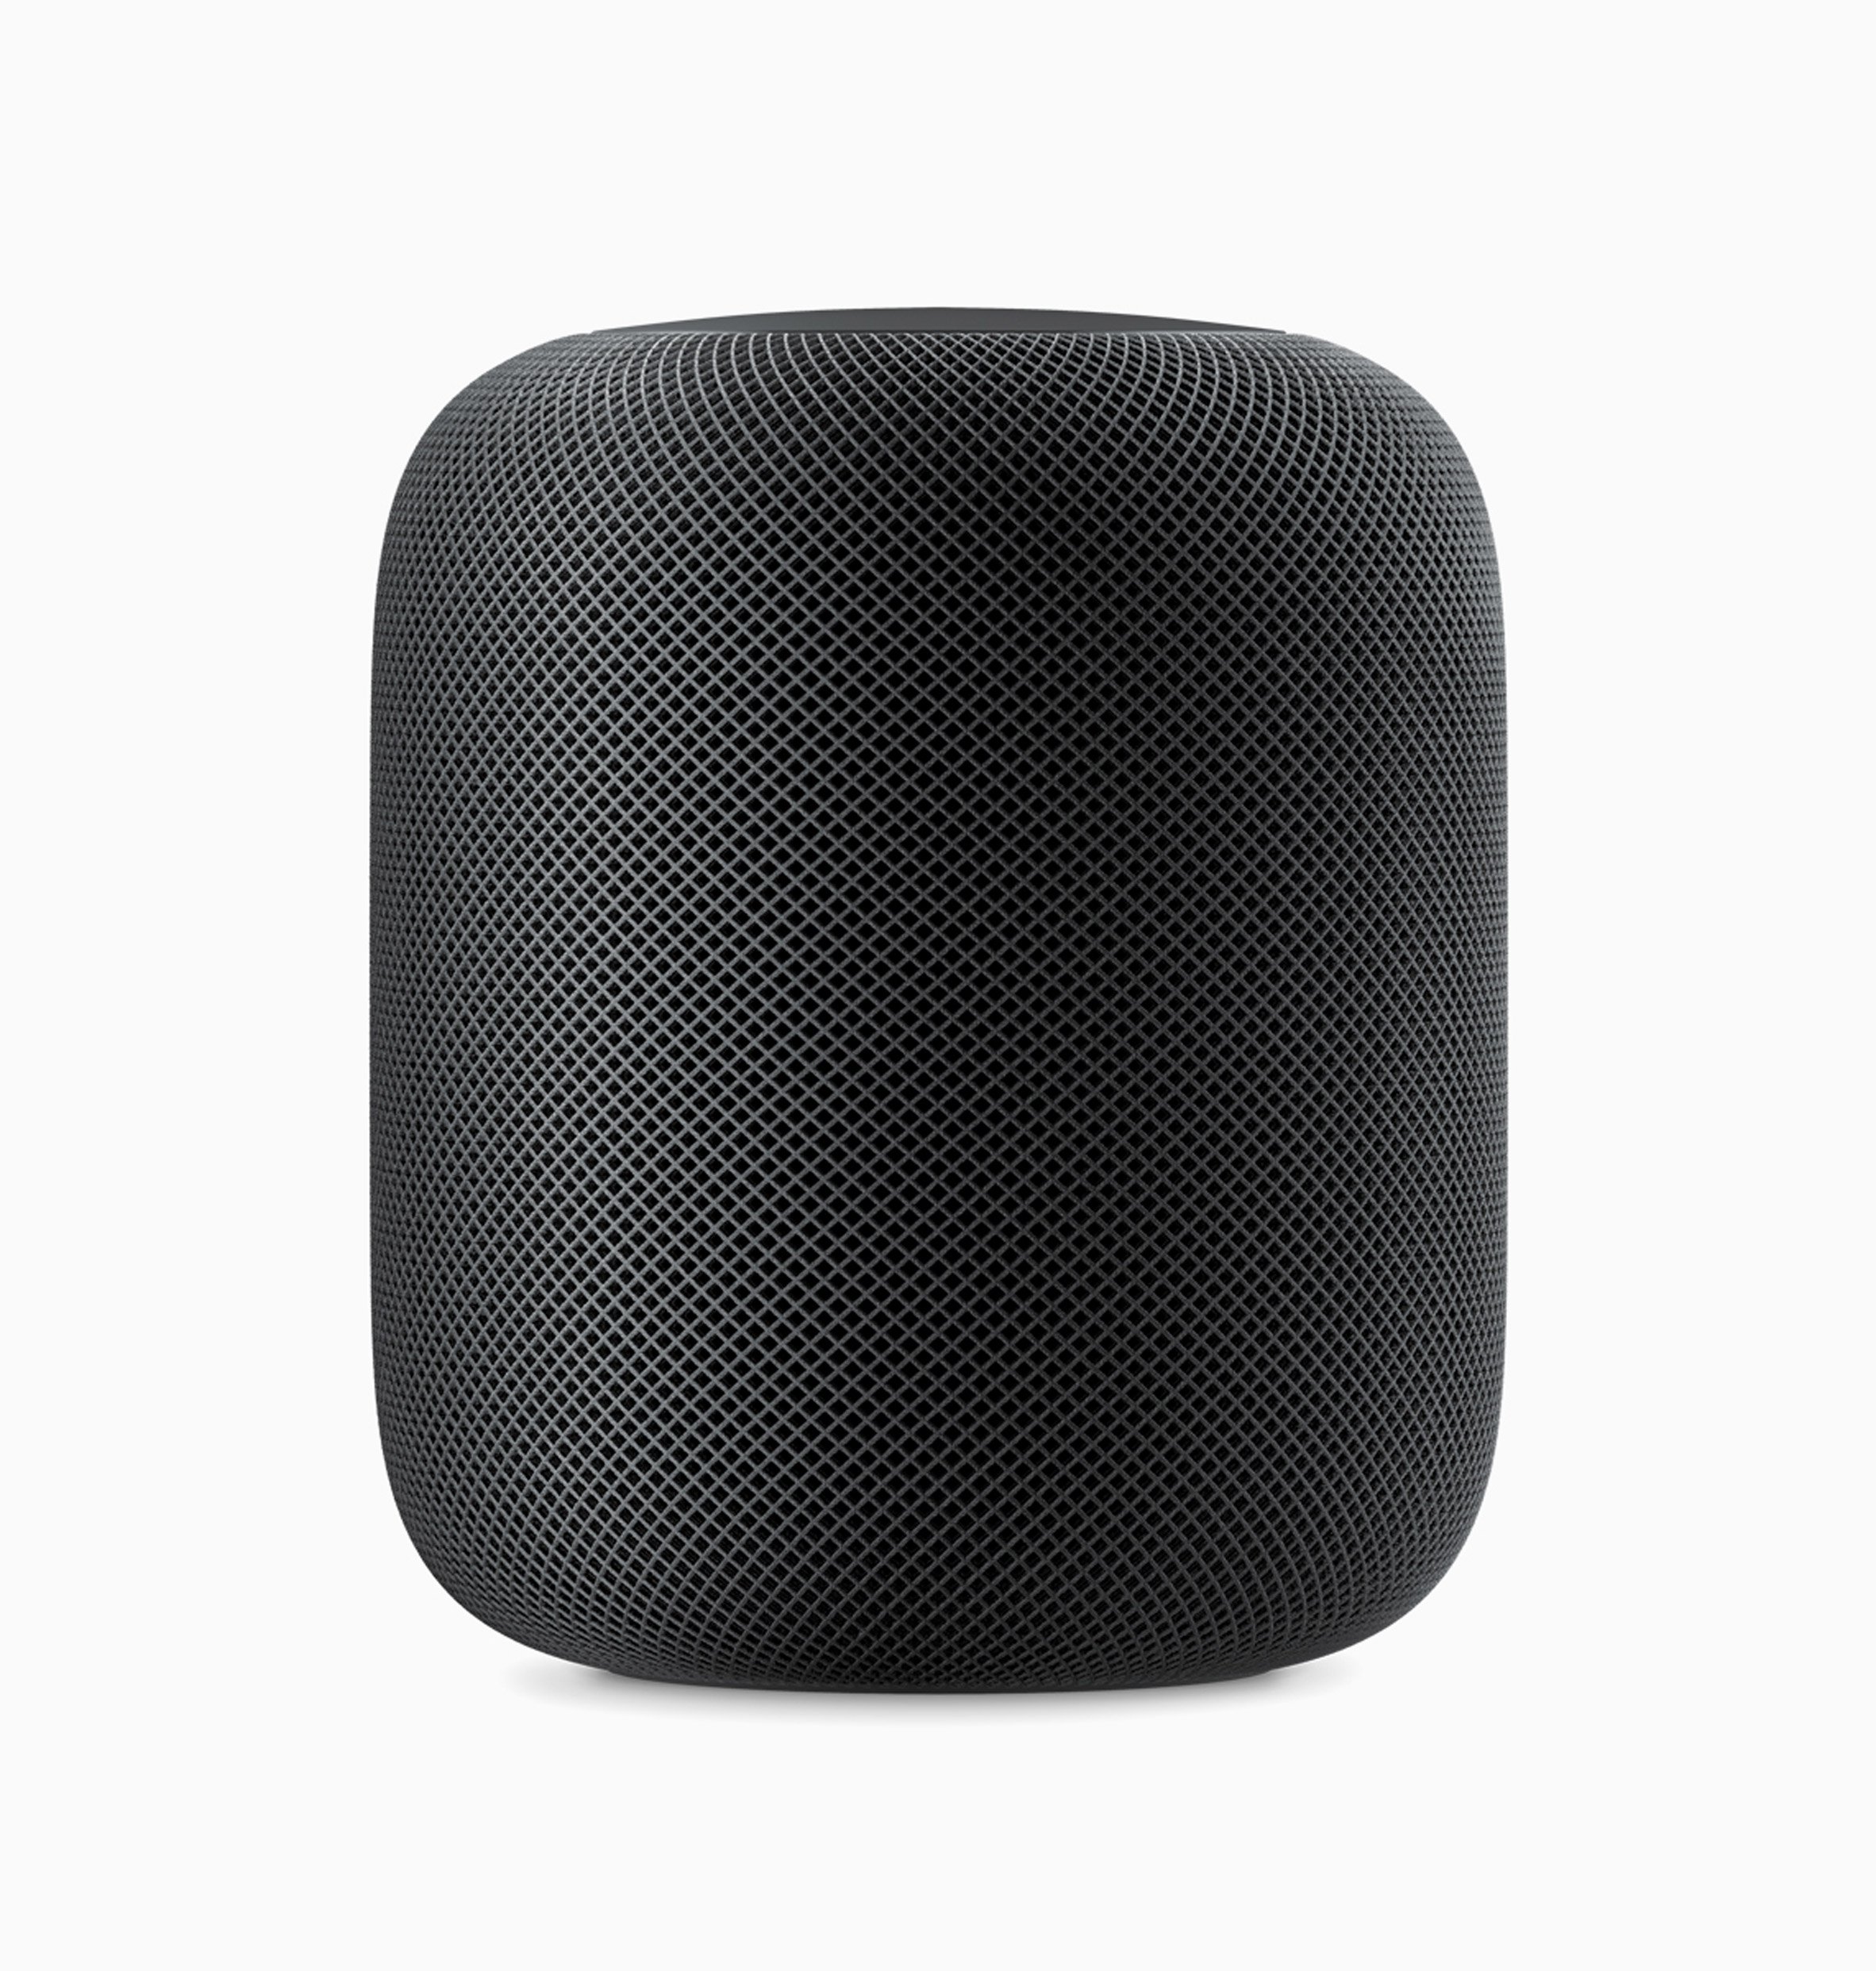 Smart Home Ideas- Apple Has Unveiled HomePod